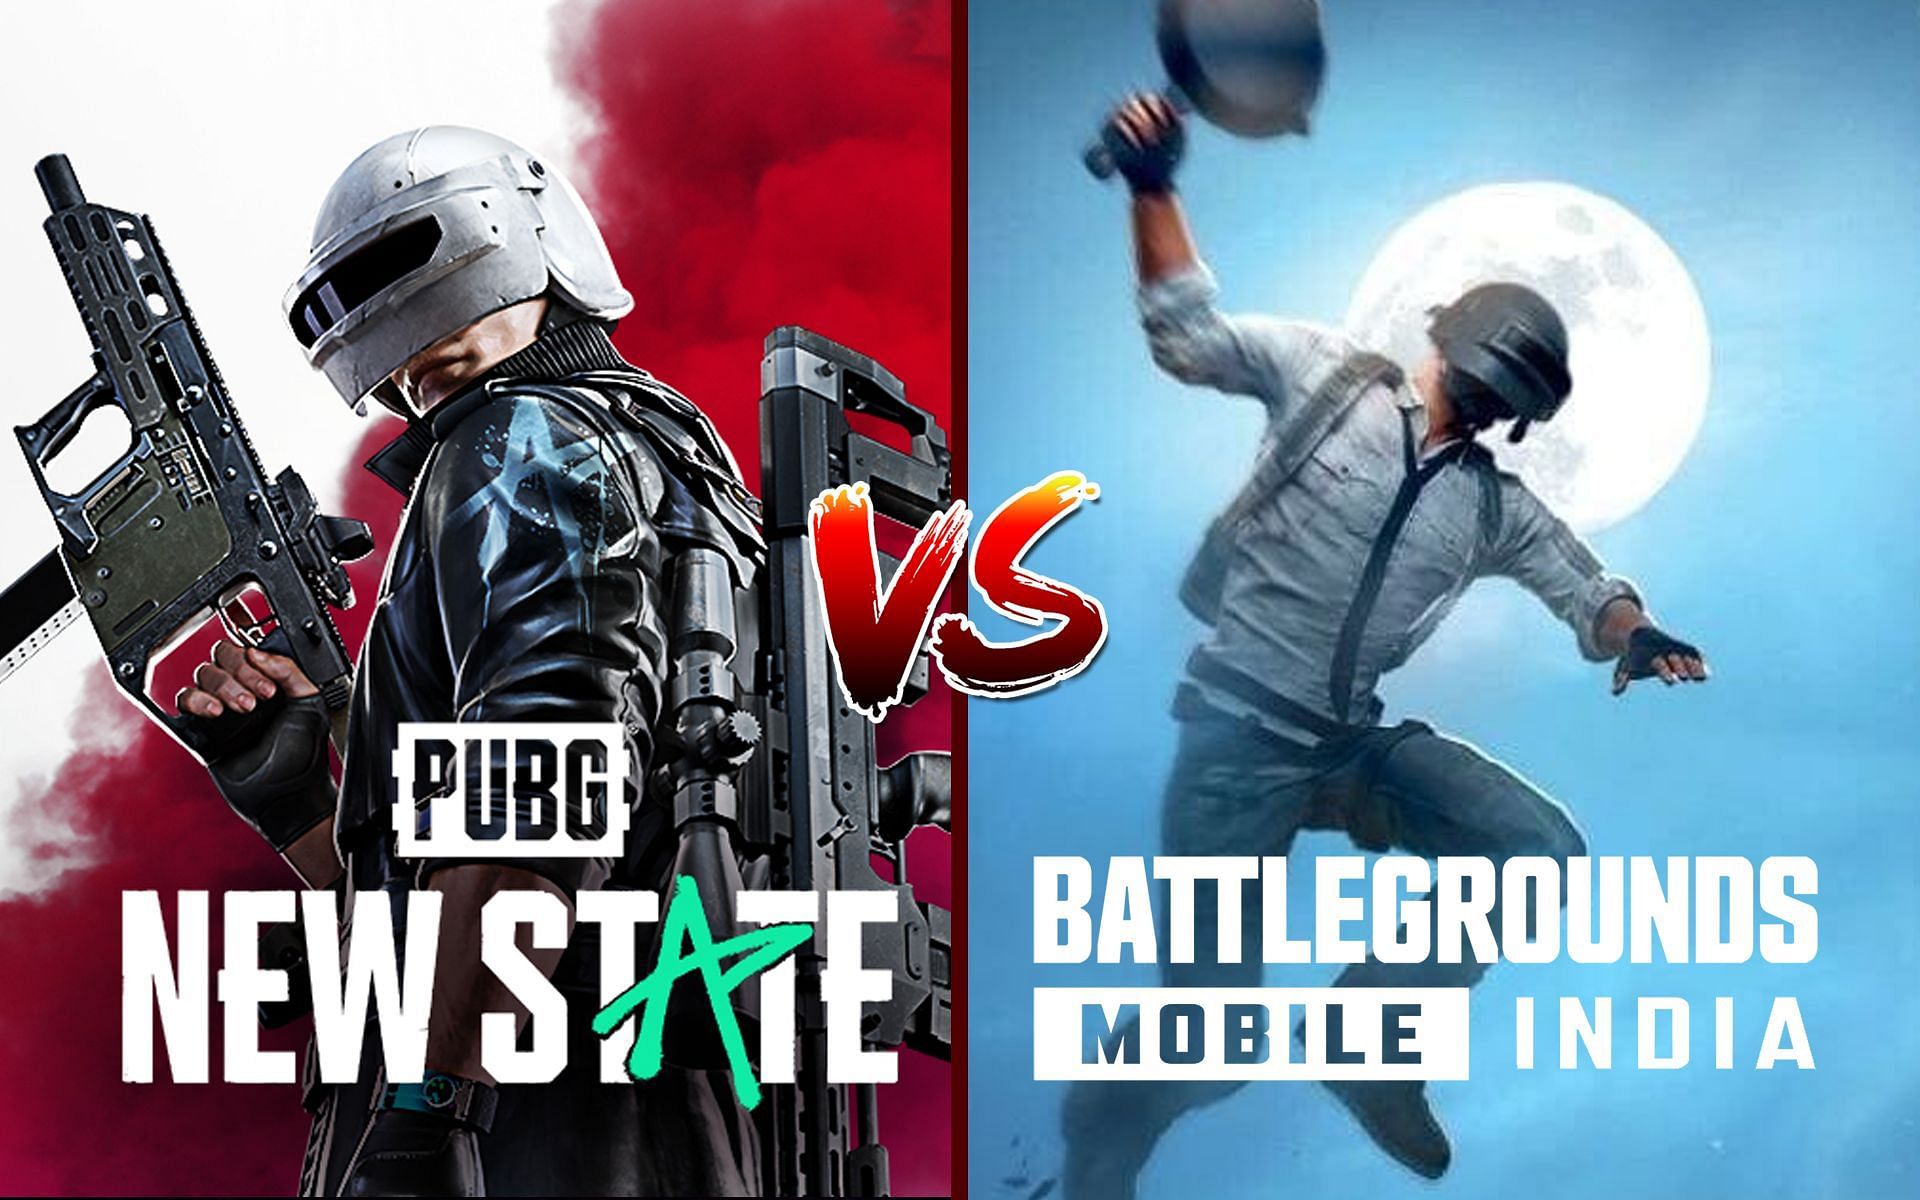 Major differences between PUBG New State and BGMI (Image via Sportskeeda)